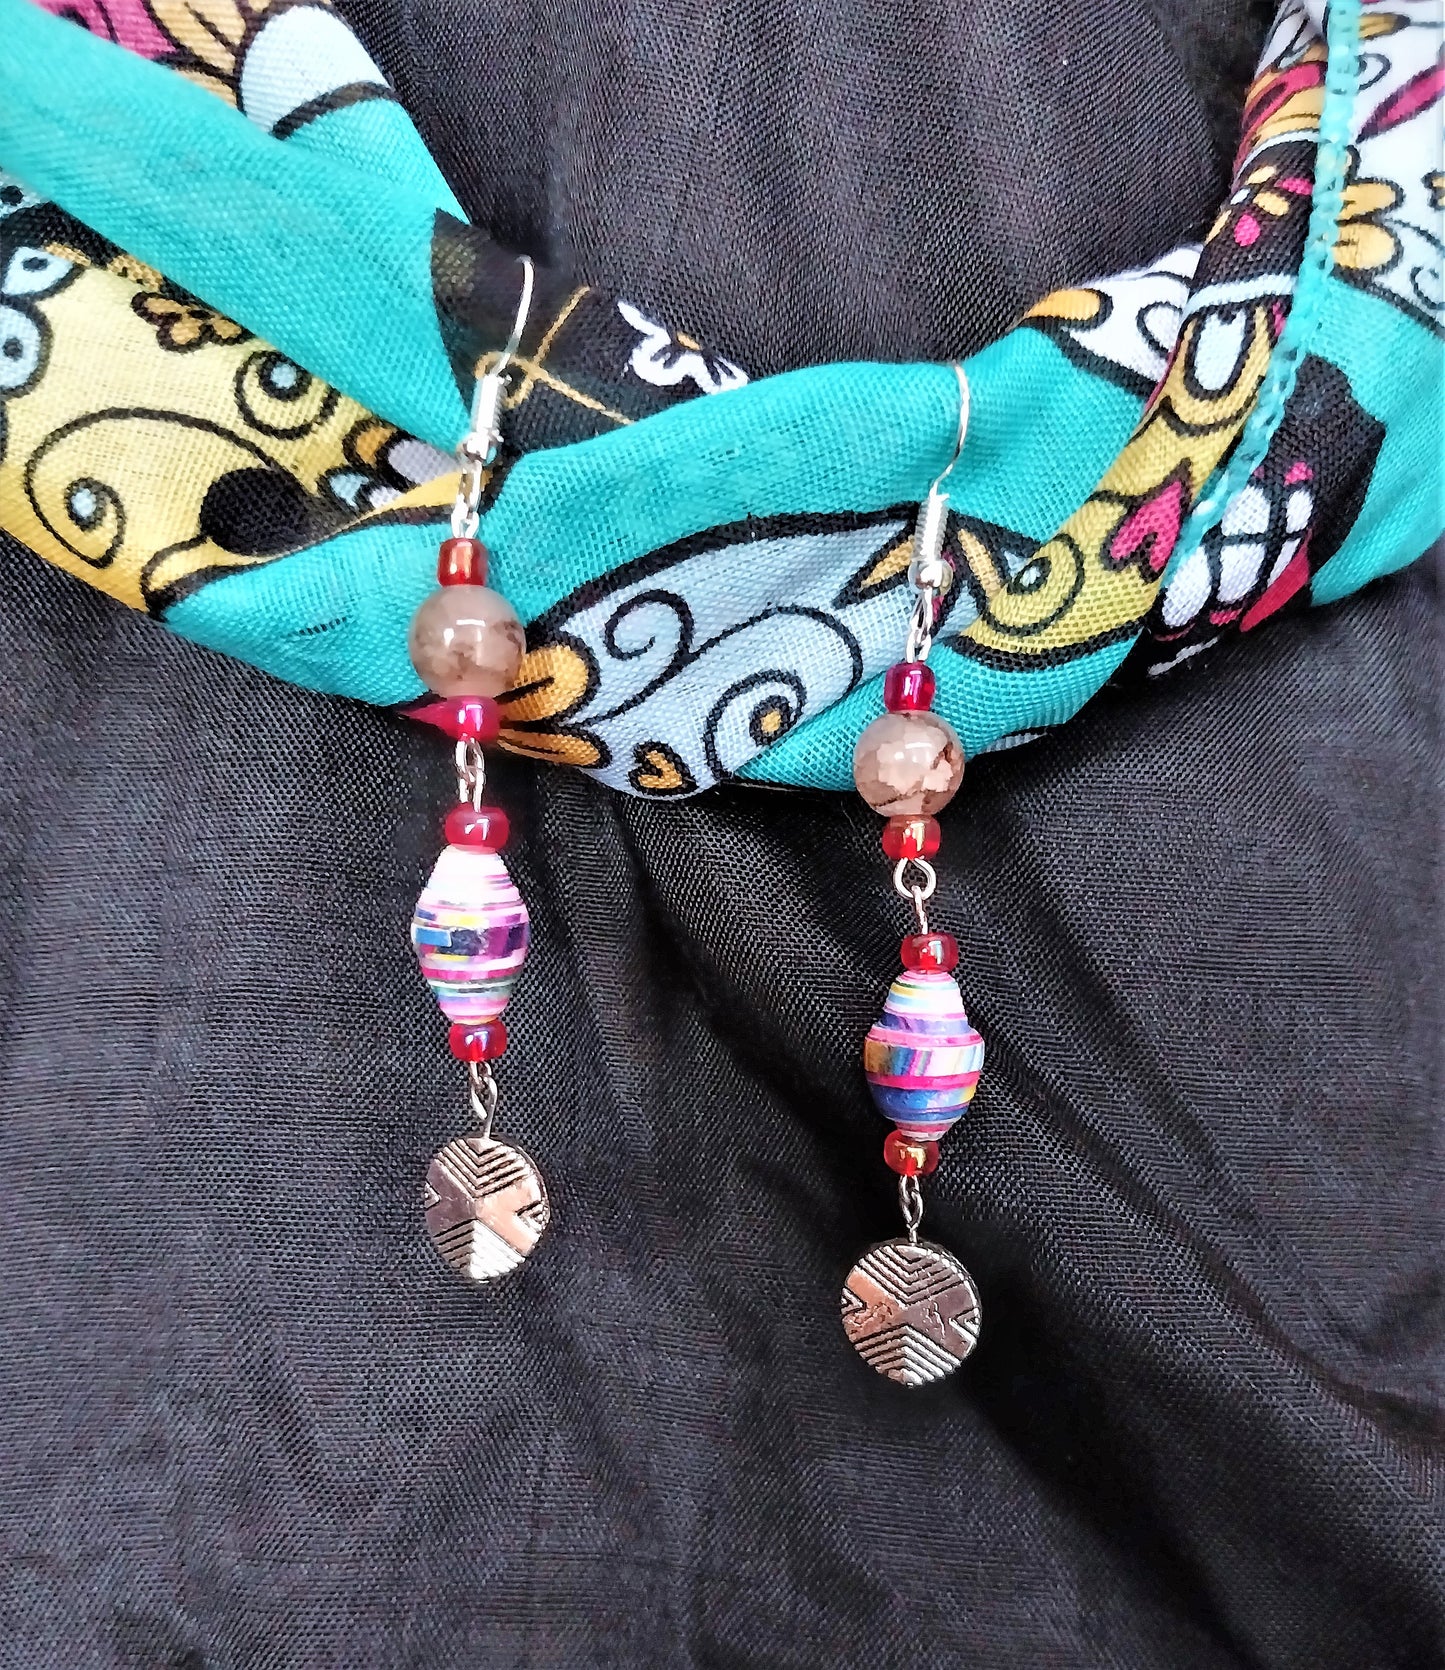 Art Deco-Style Earrings With Multicolored Handmade Beads